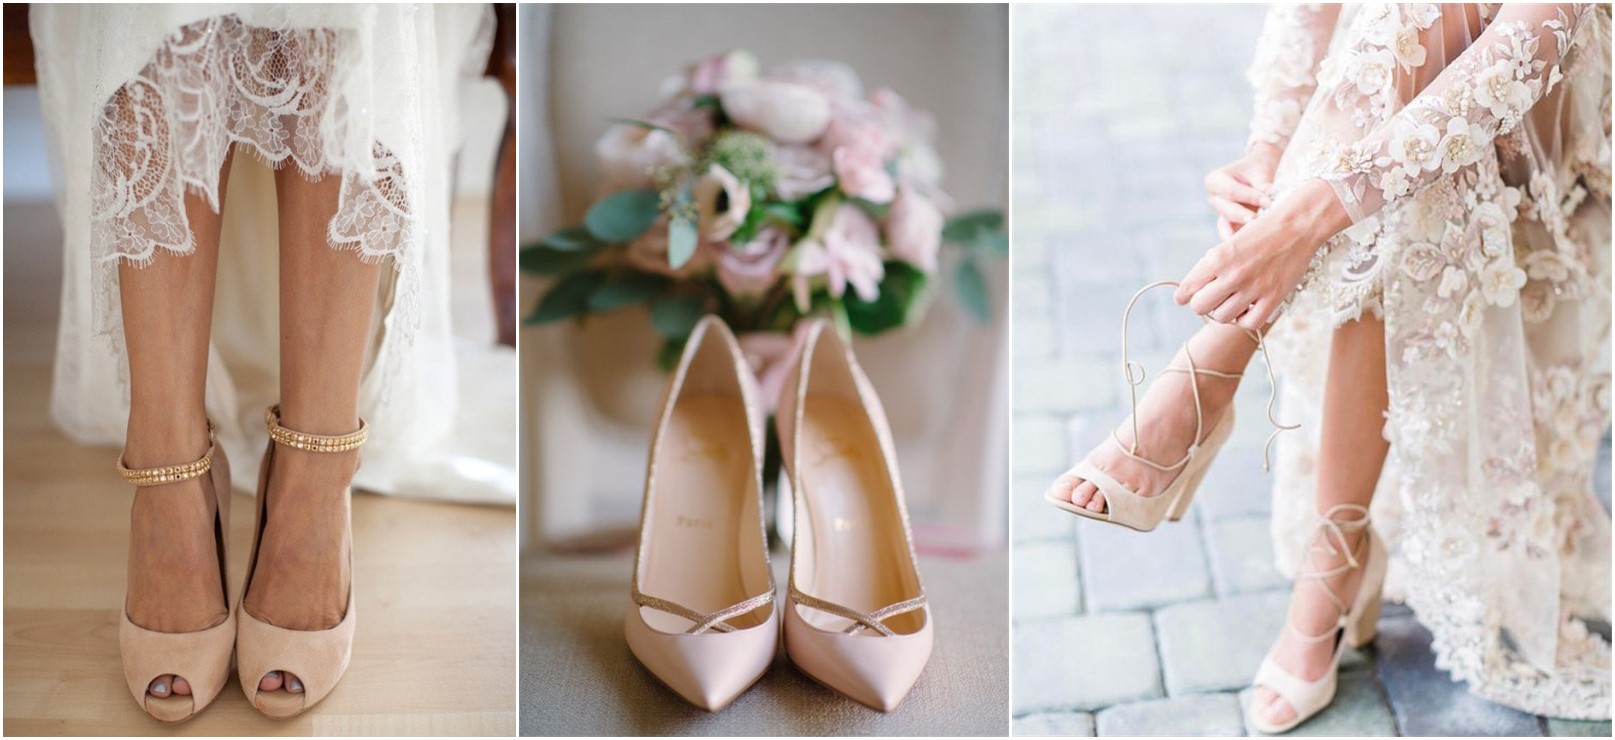 27 Stylish and Charming Nude Wedding Shoes for 2020 trend! - Page 2